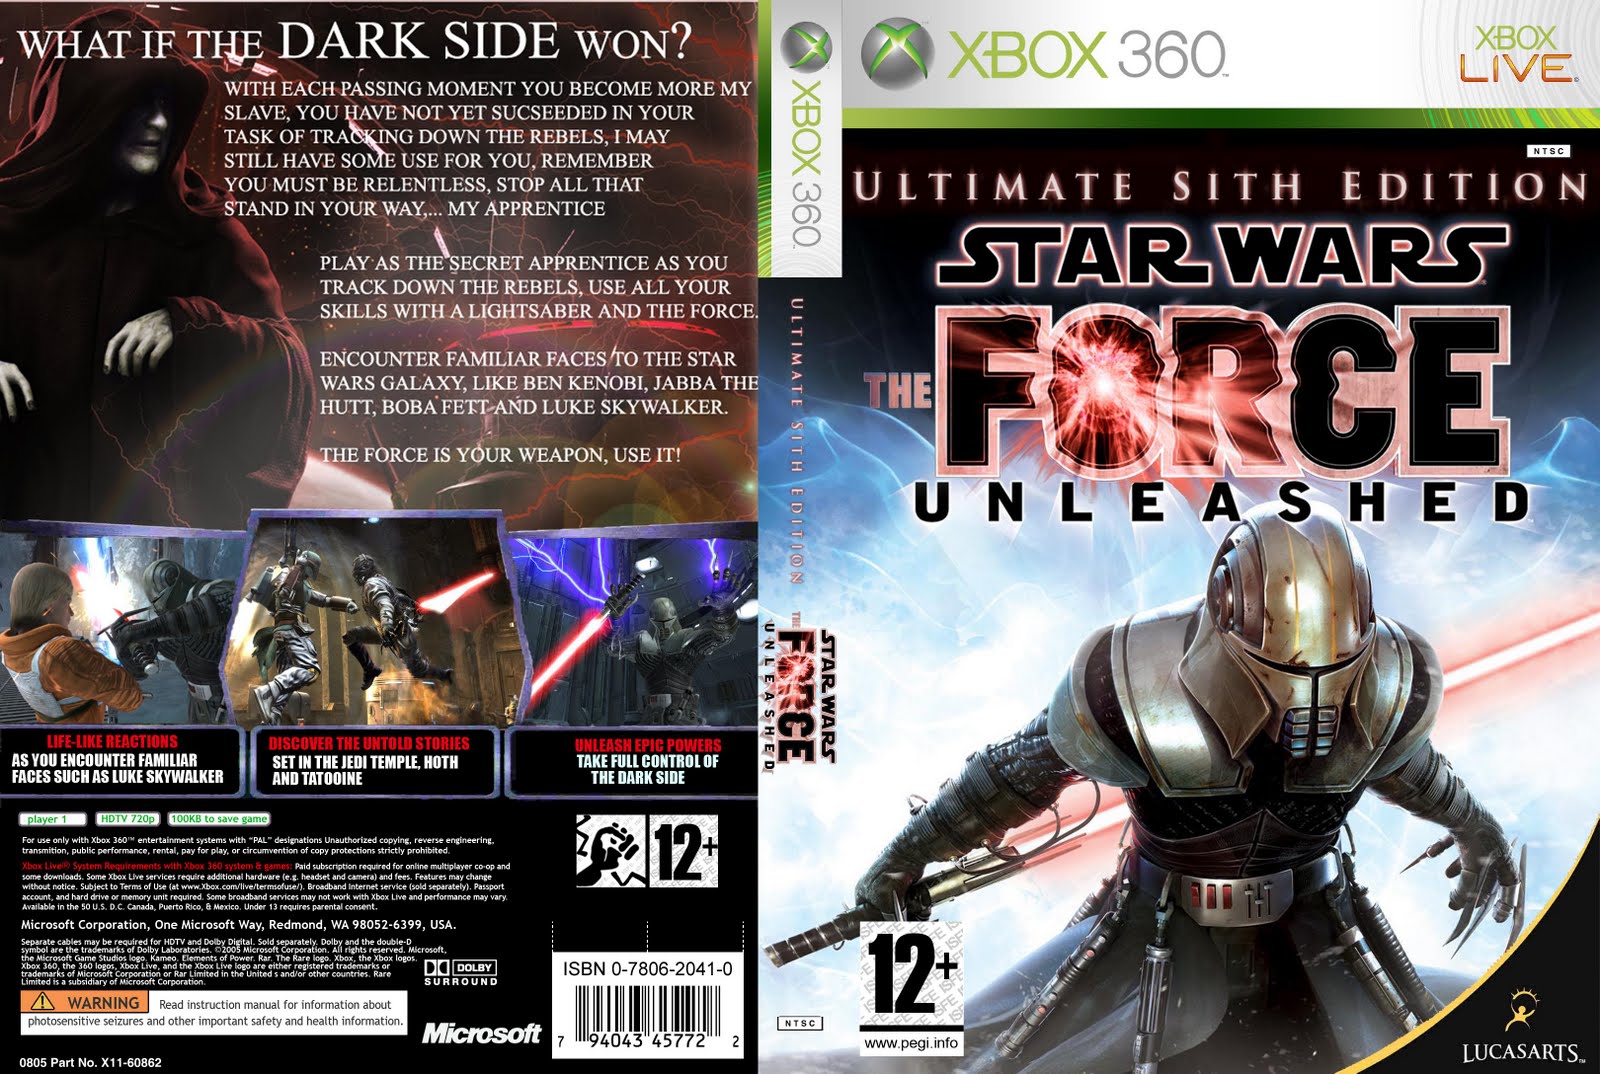 Download Free Software All Star Wars Games Xbox 360